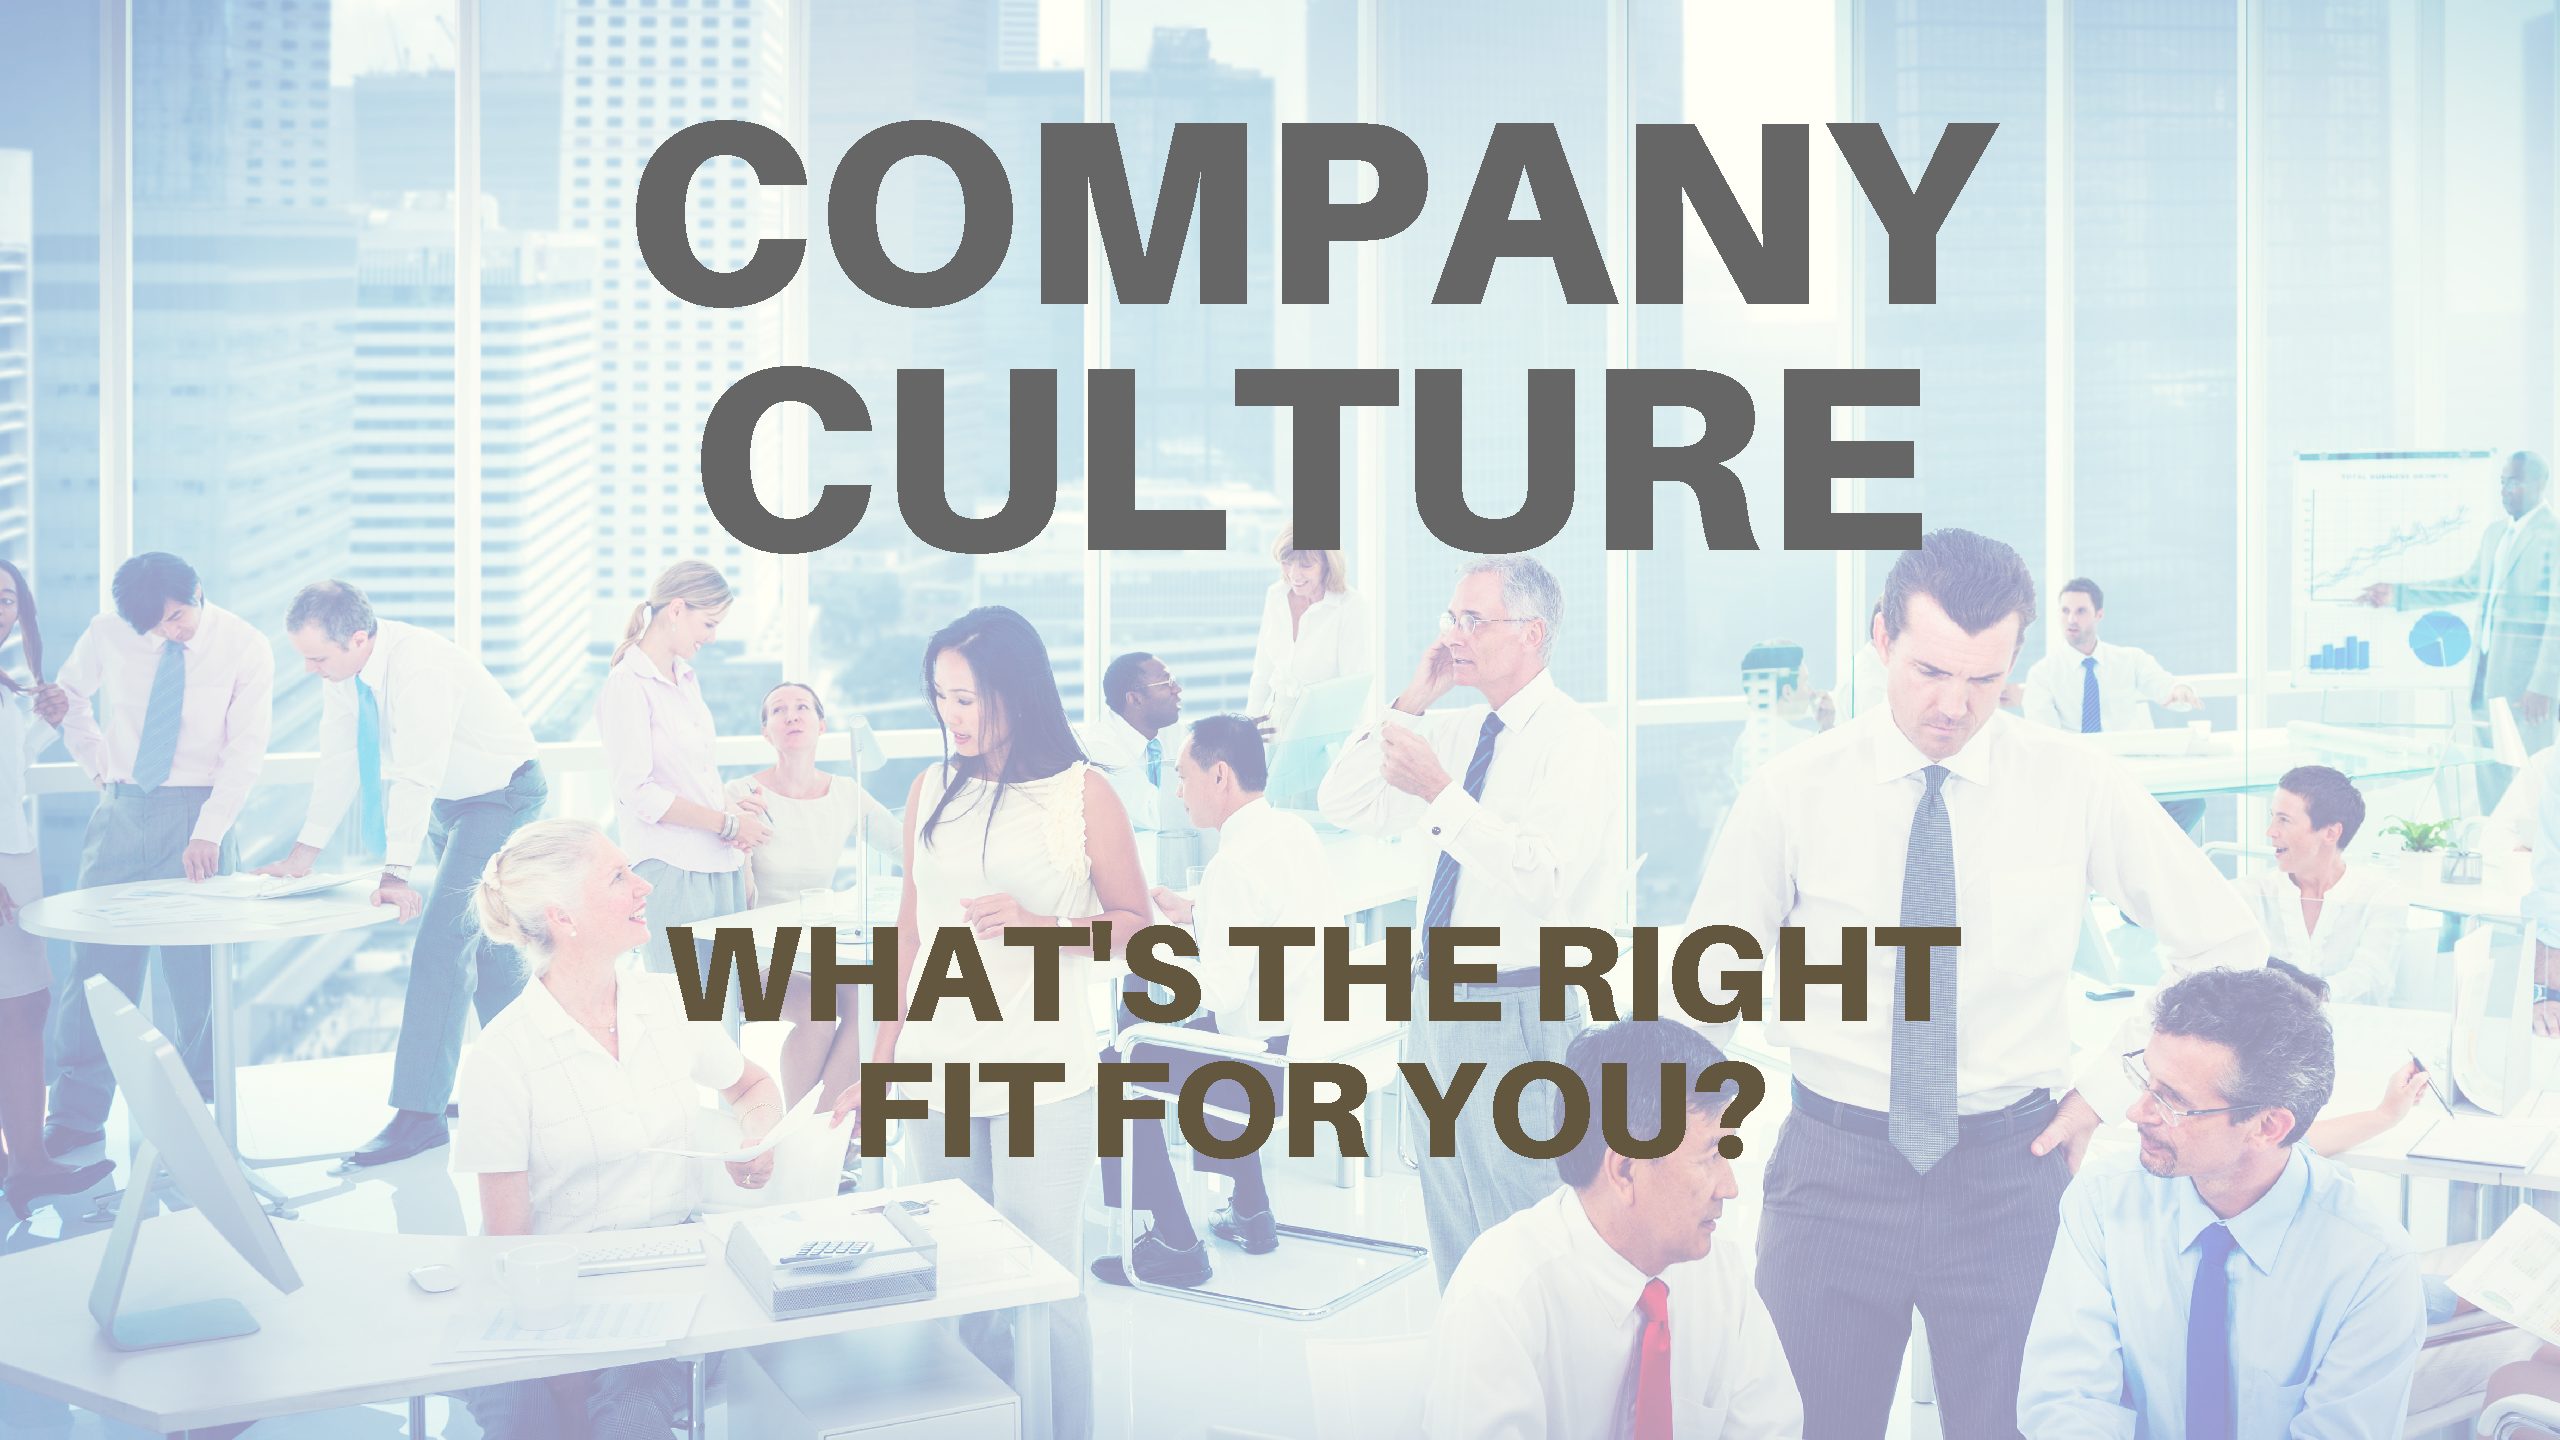 Company Culture: What are you looking for and how do you learn about a company’s culture?